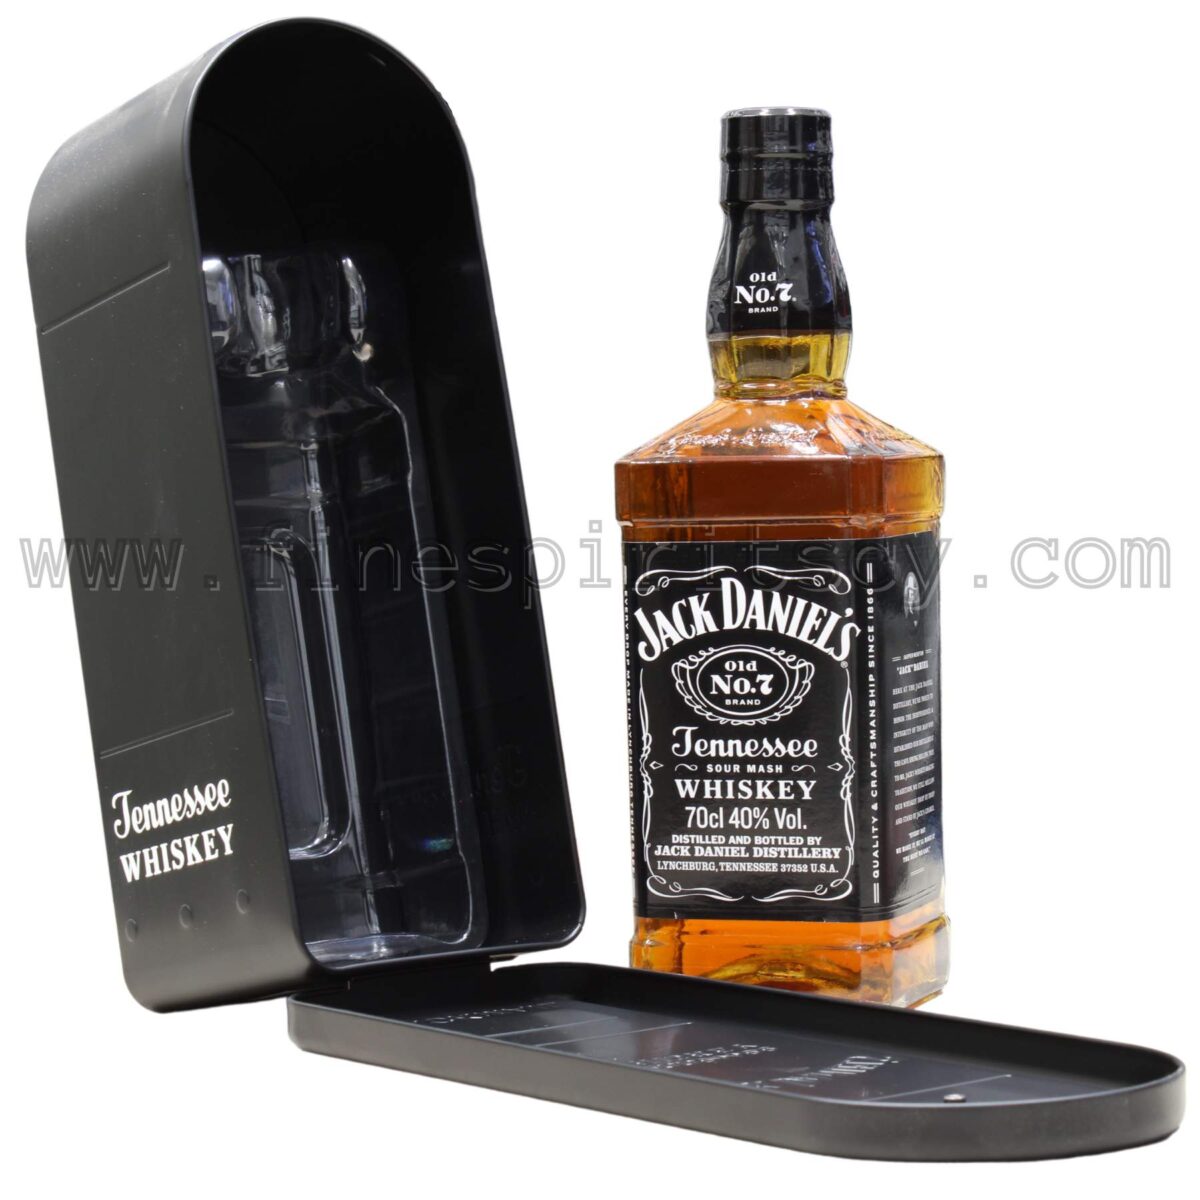 Jack Daniels Mailbox Jackmail Limited Edition Tin Cyprus Price Cheap Best